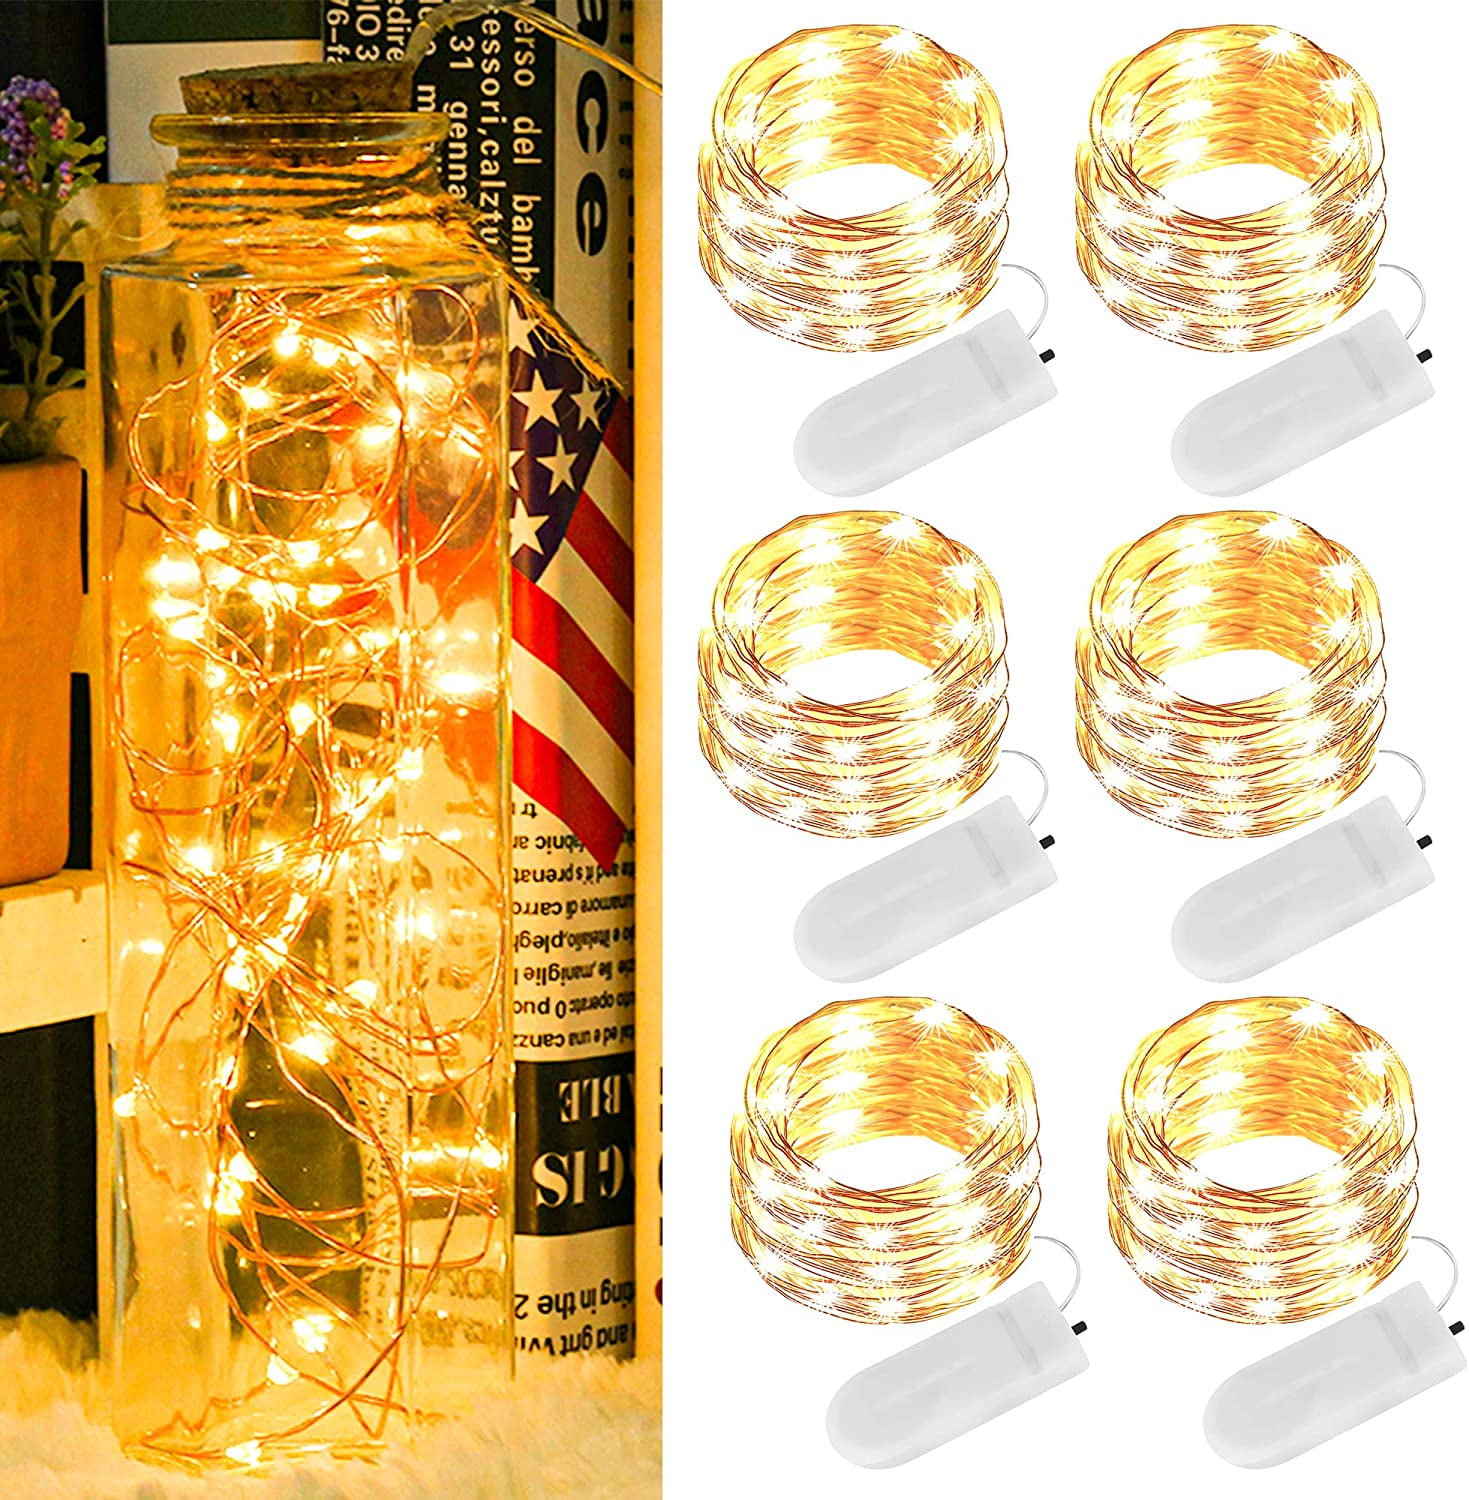 20 LED 2M String Fairy Lights Battery Operated Xmas Party Room Decor 